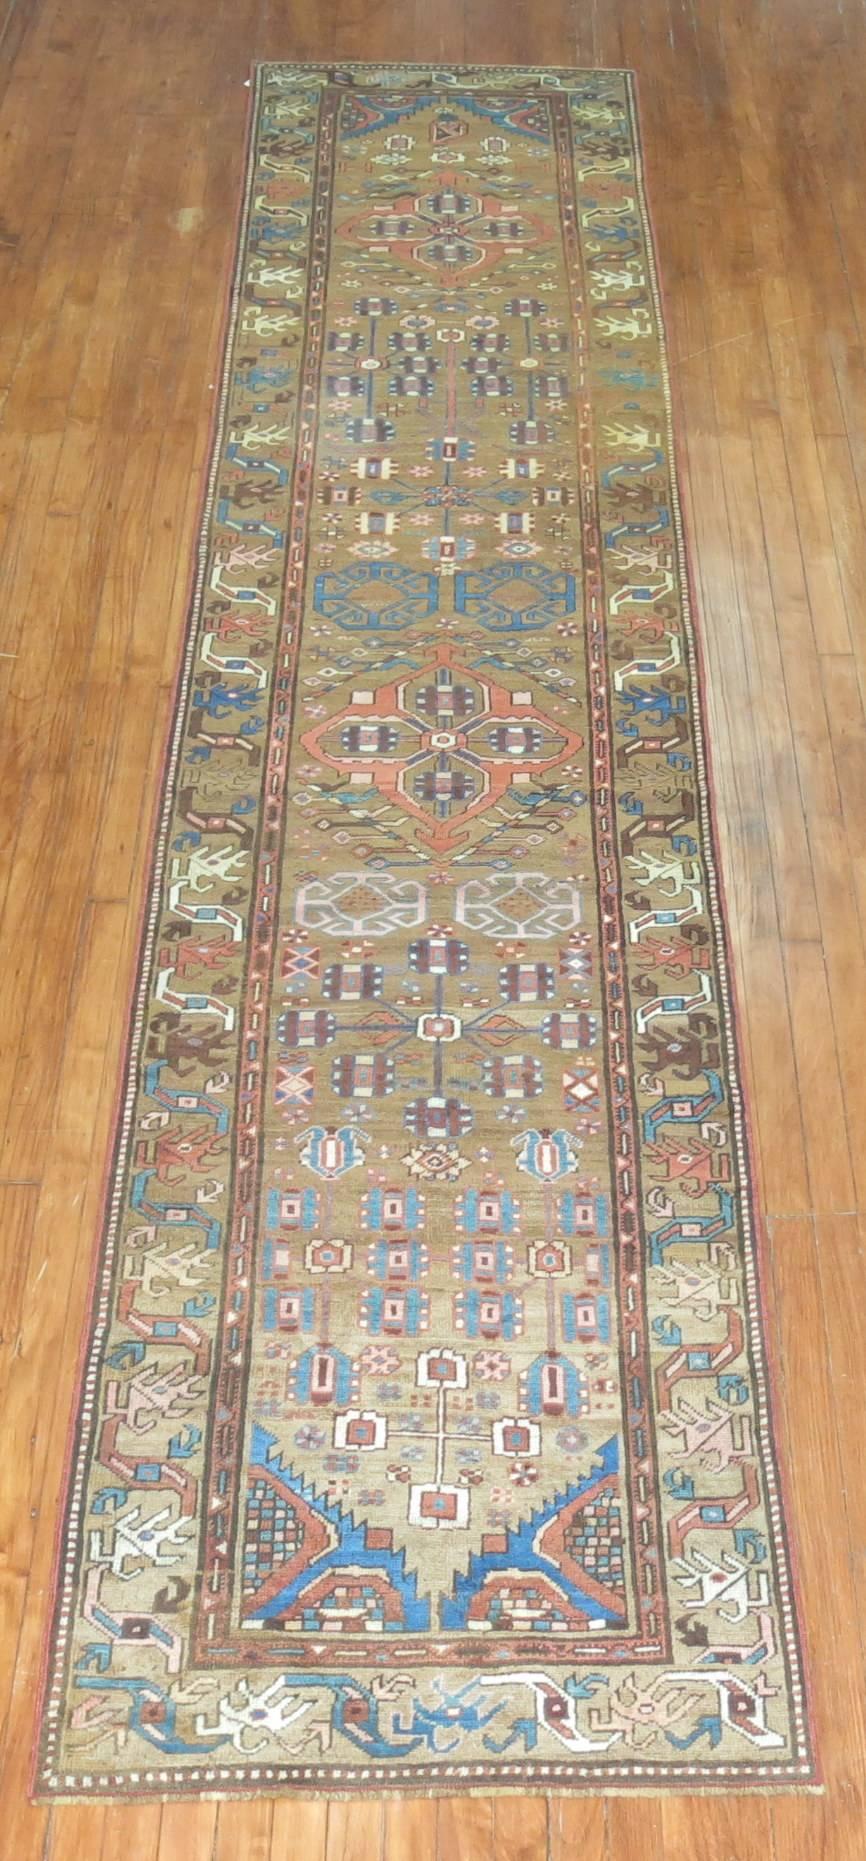 An early 20th century Tribal Persian Bakshaish runner in browns and blue.

Measures: 2'9